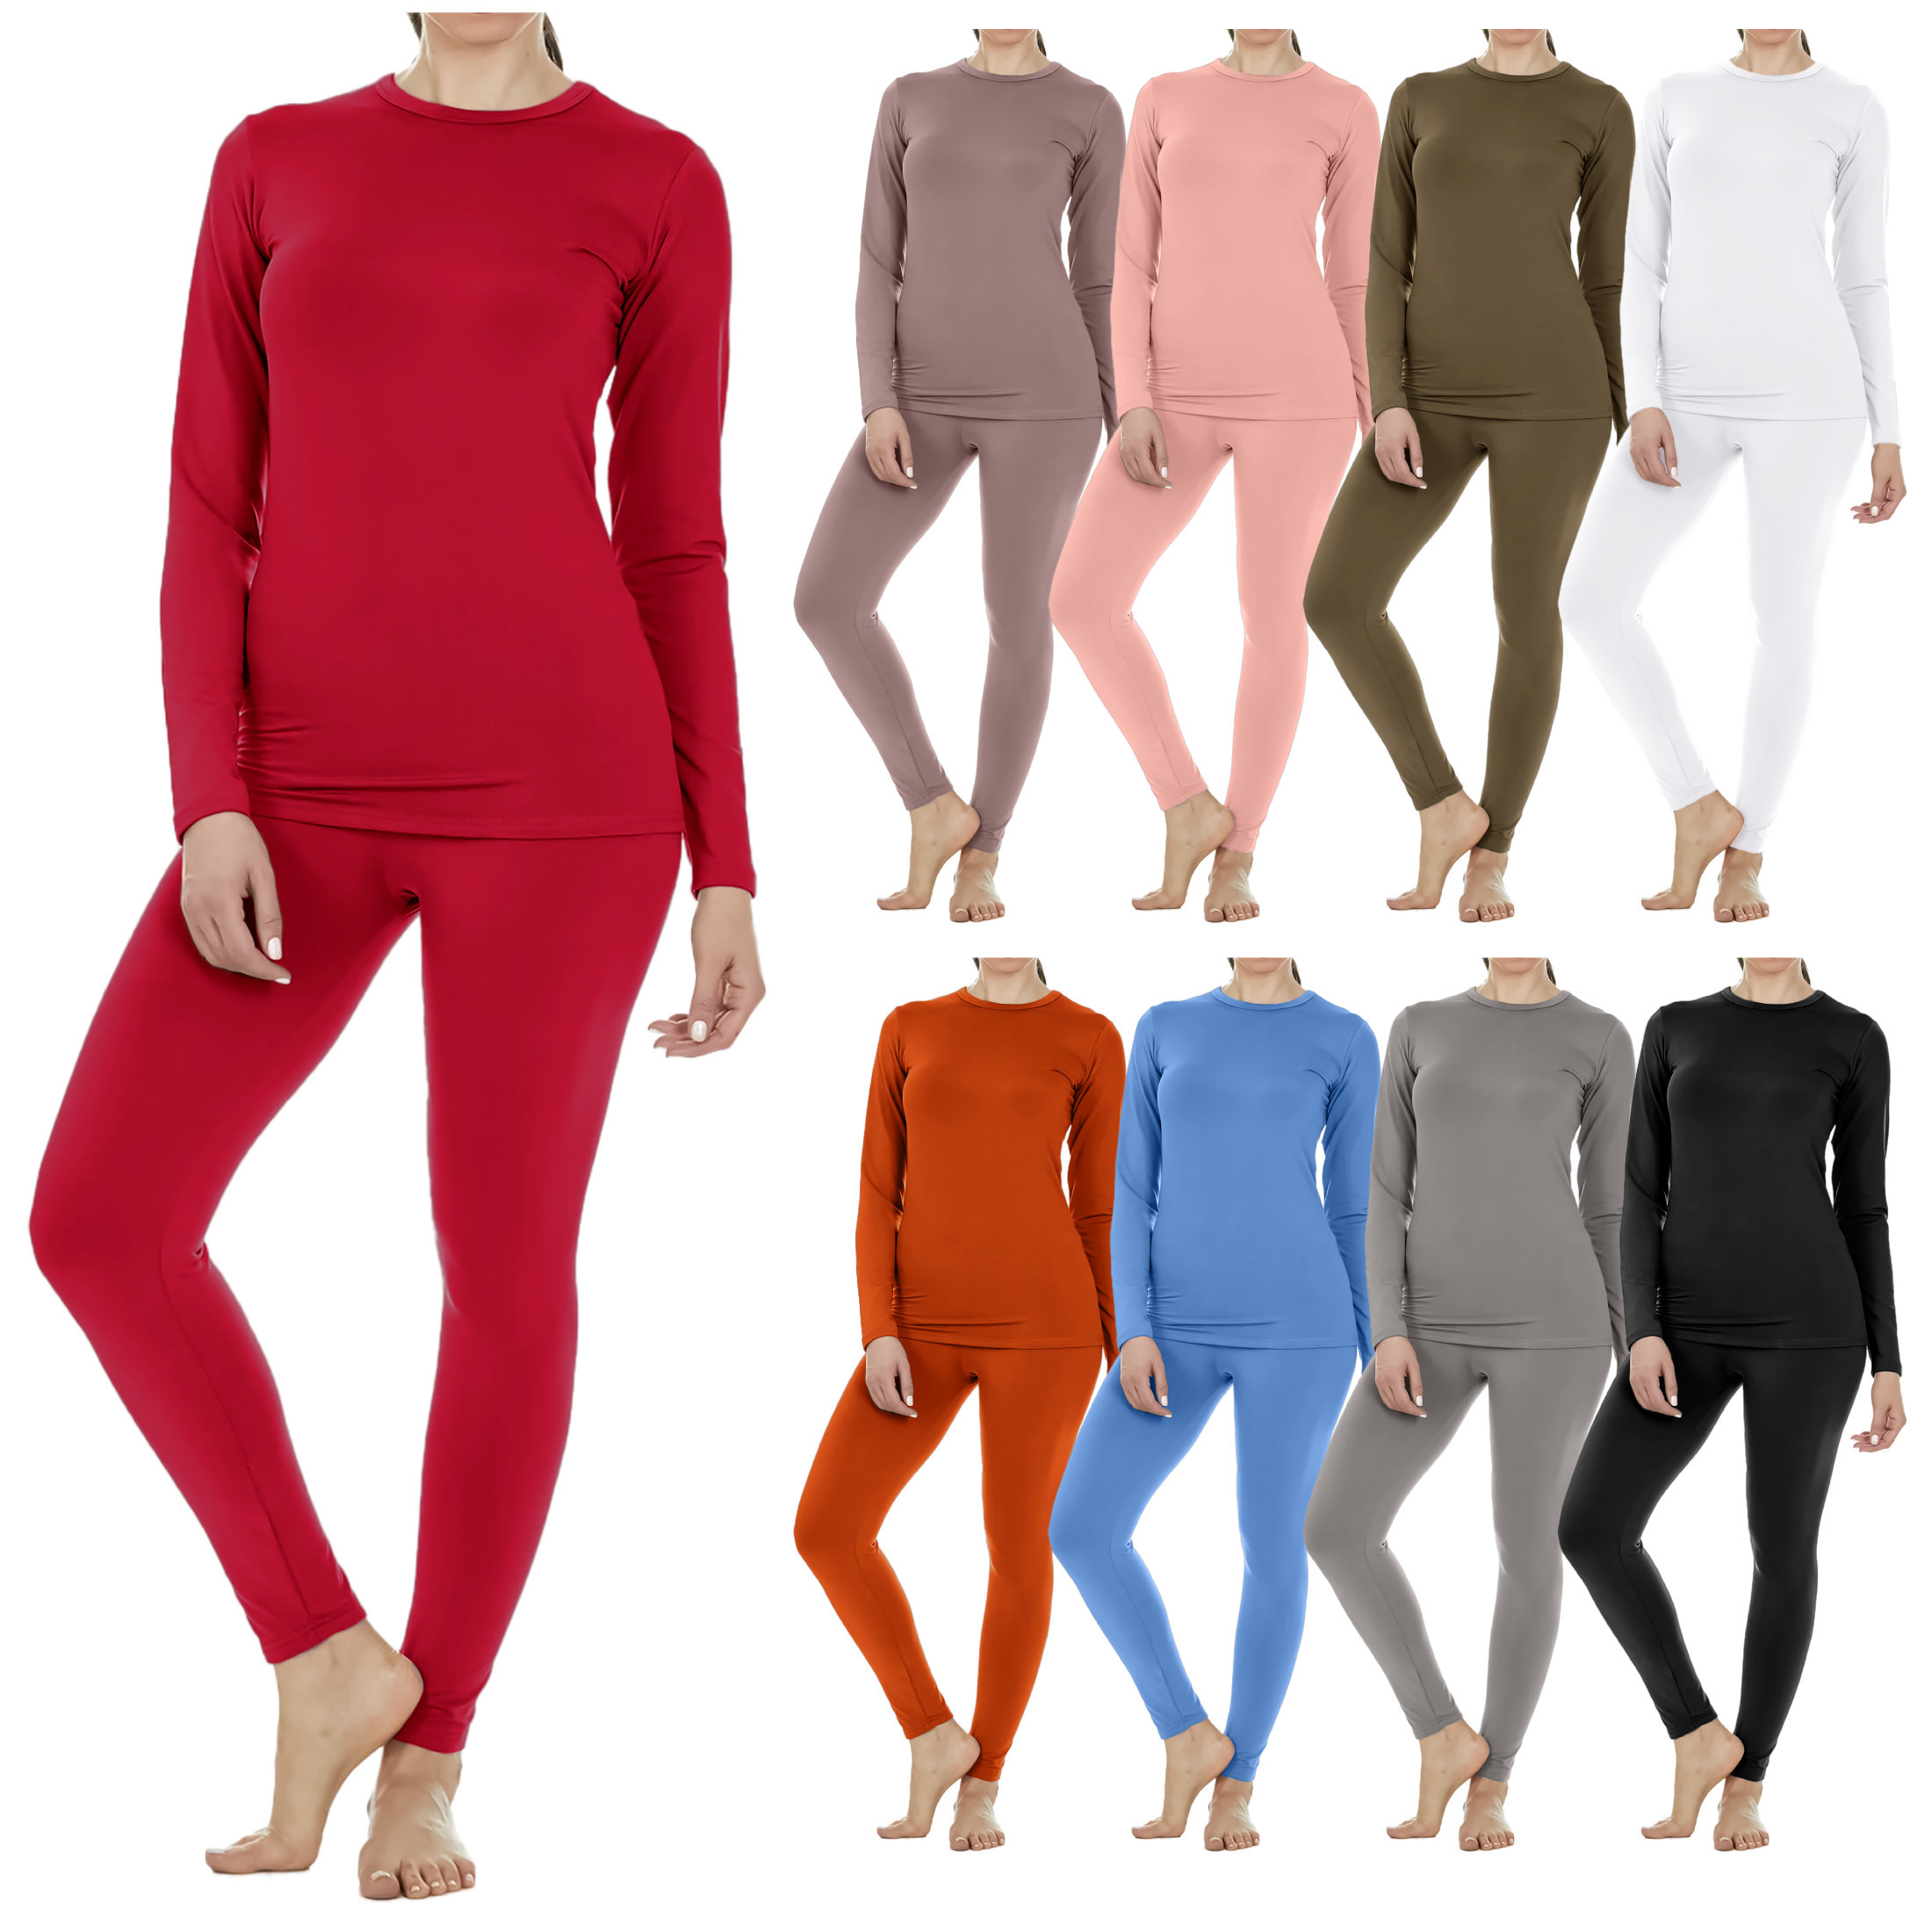 3 Sets: Women's Fleece Lined Thermal Sets For Cold Weather - Medium